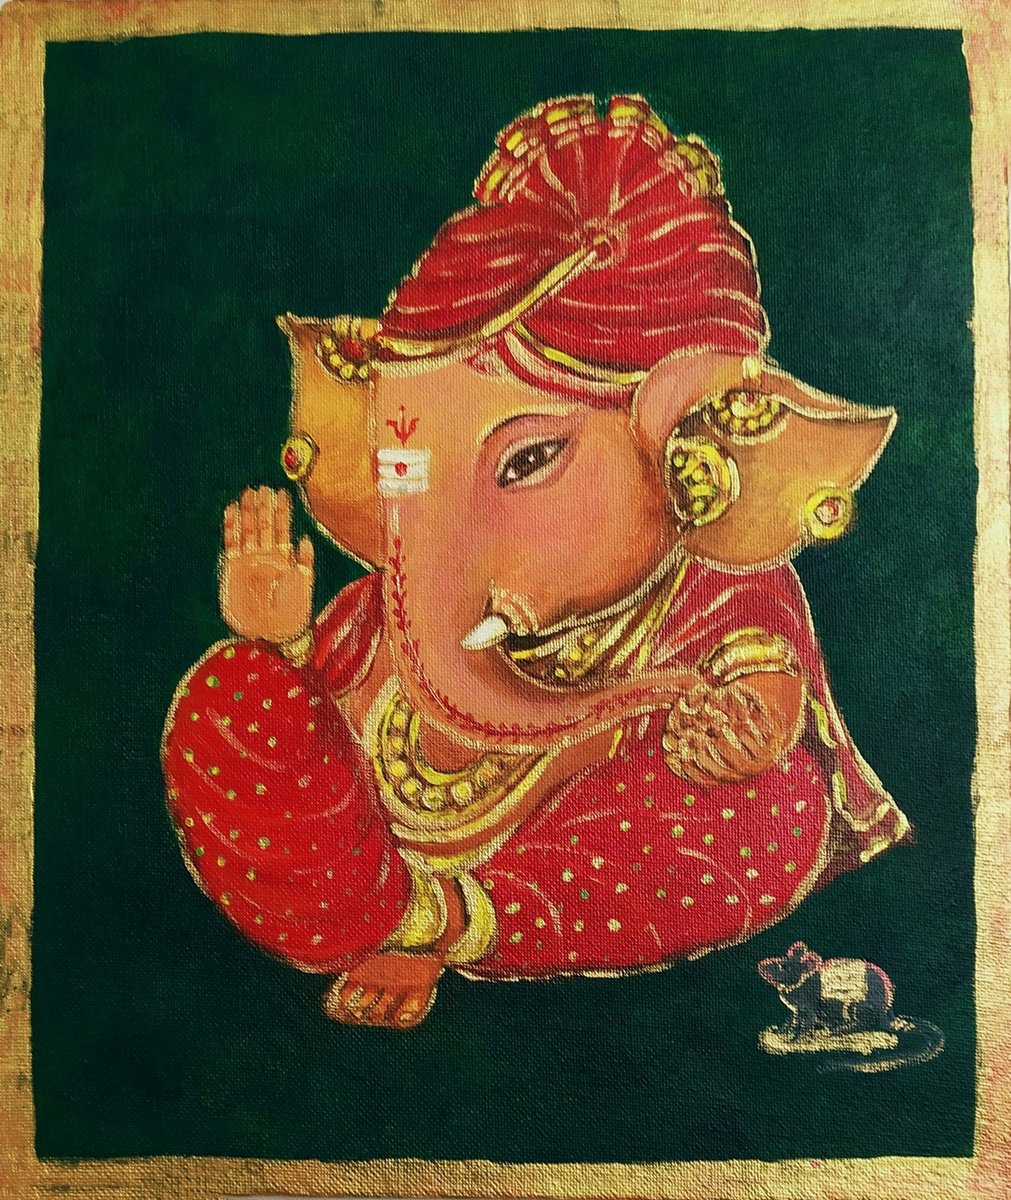 Baby Ganesha with a red turban - 10x 12 acrylic painting on canvas panel by Asha Shenoy